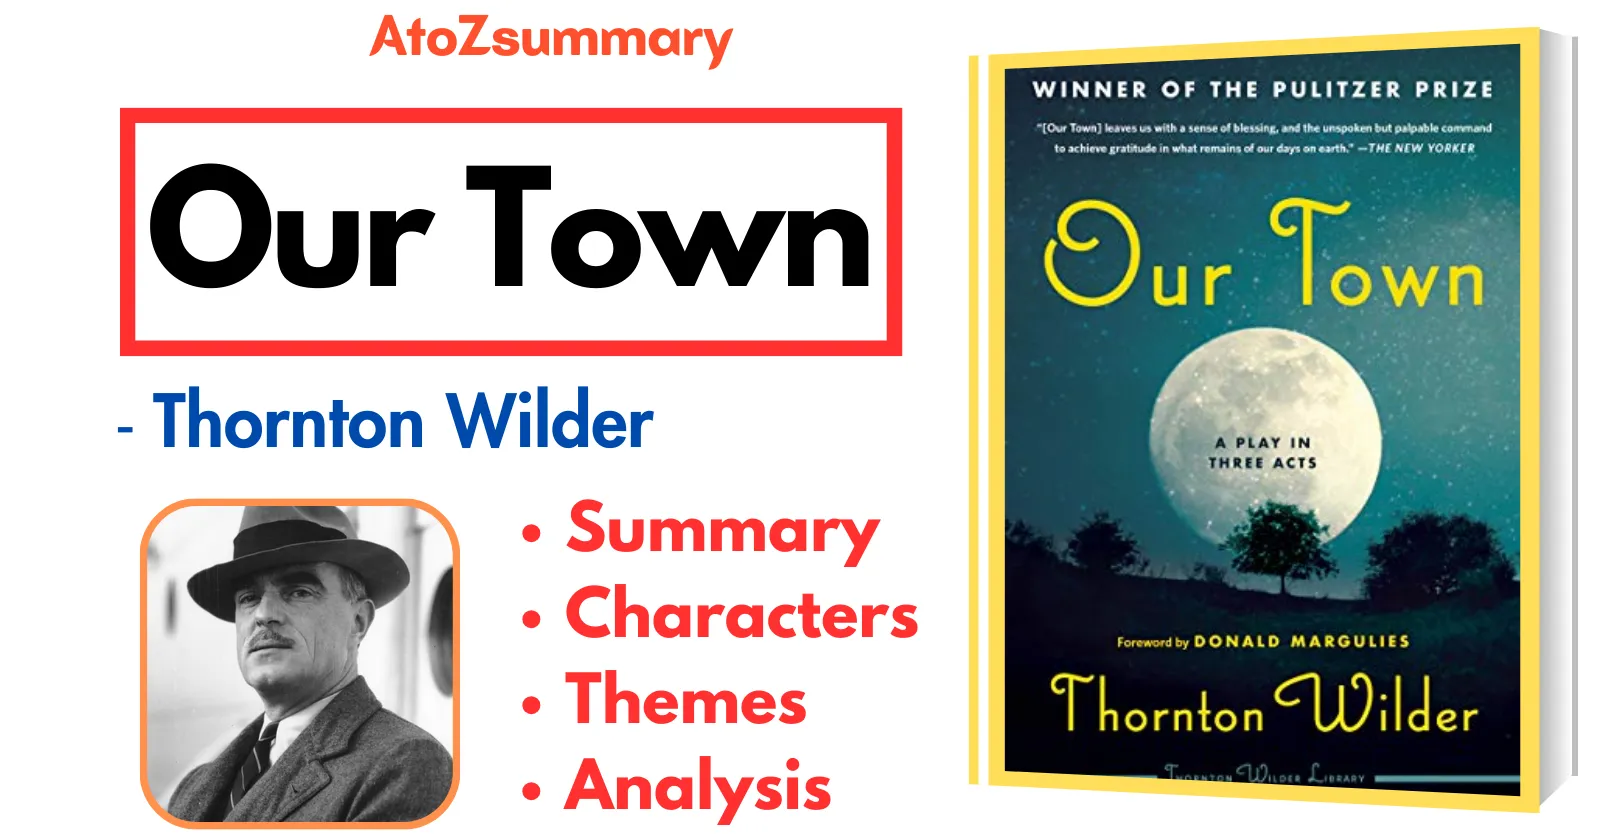 Our Town Summary